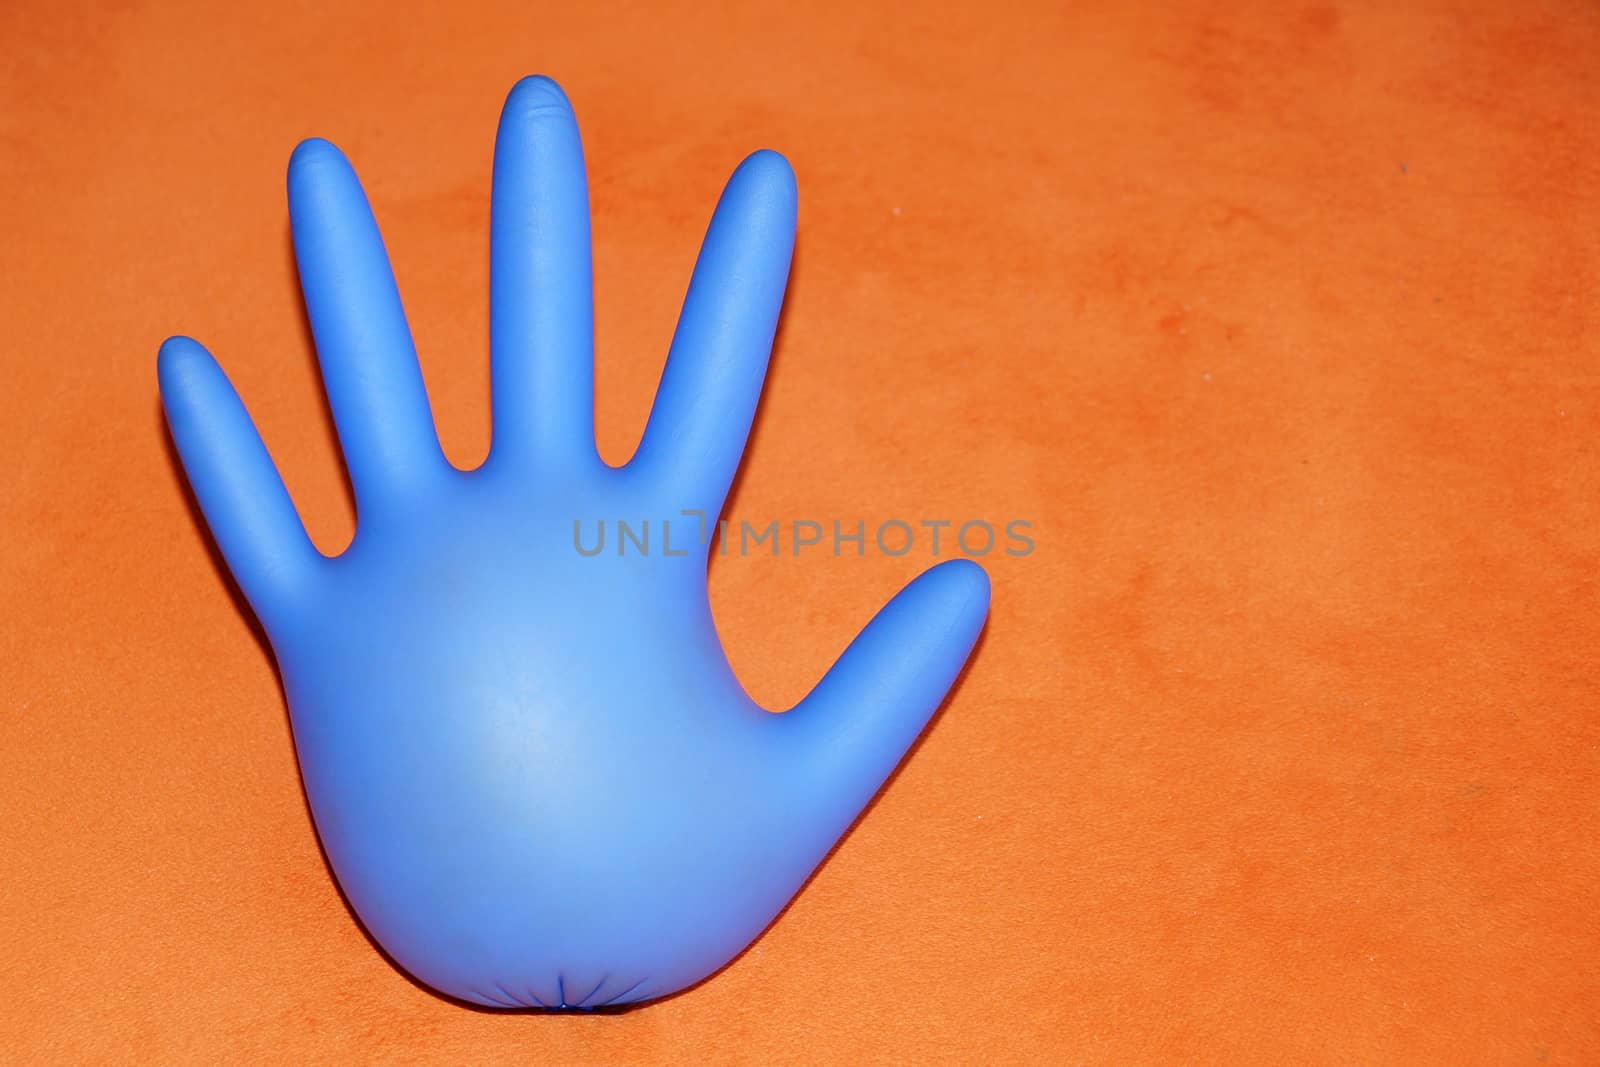 inflated rubber medical glove on orange background, copy space by Annado